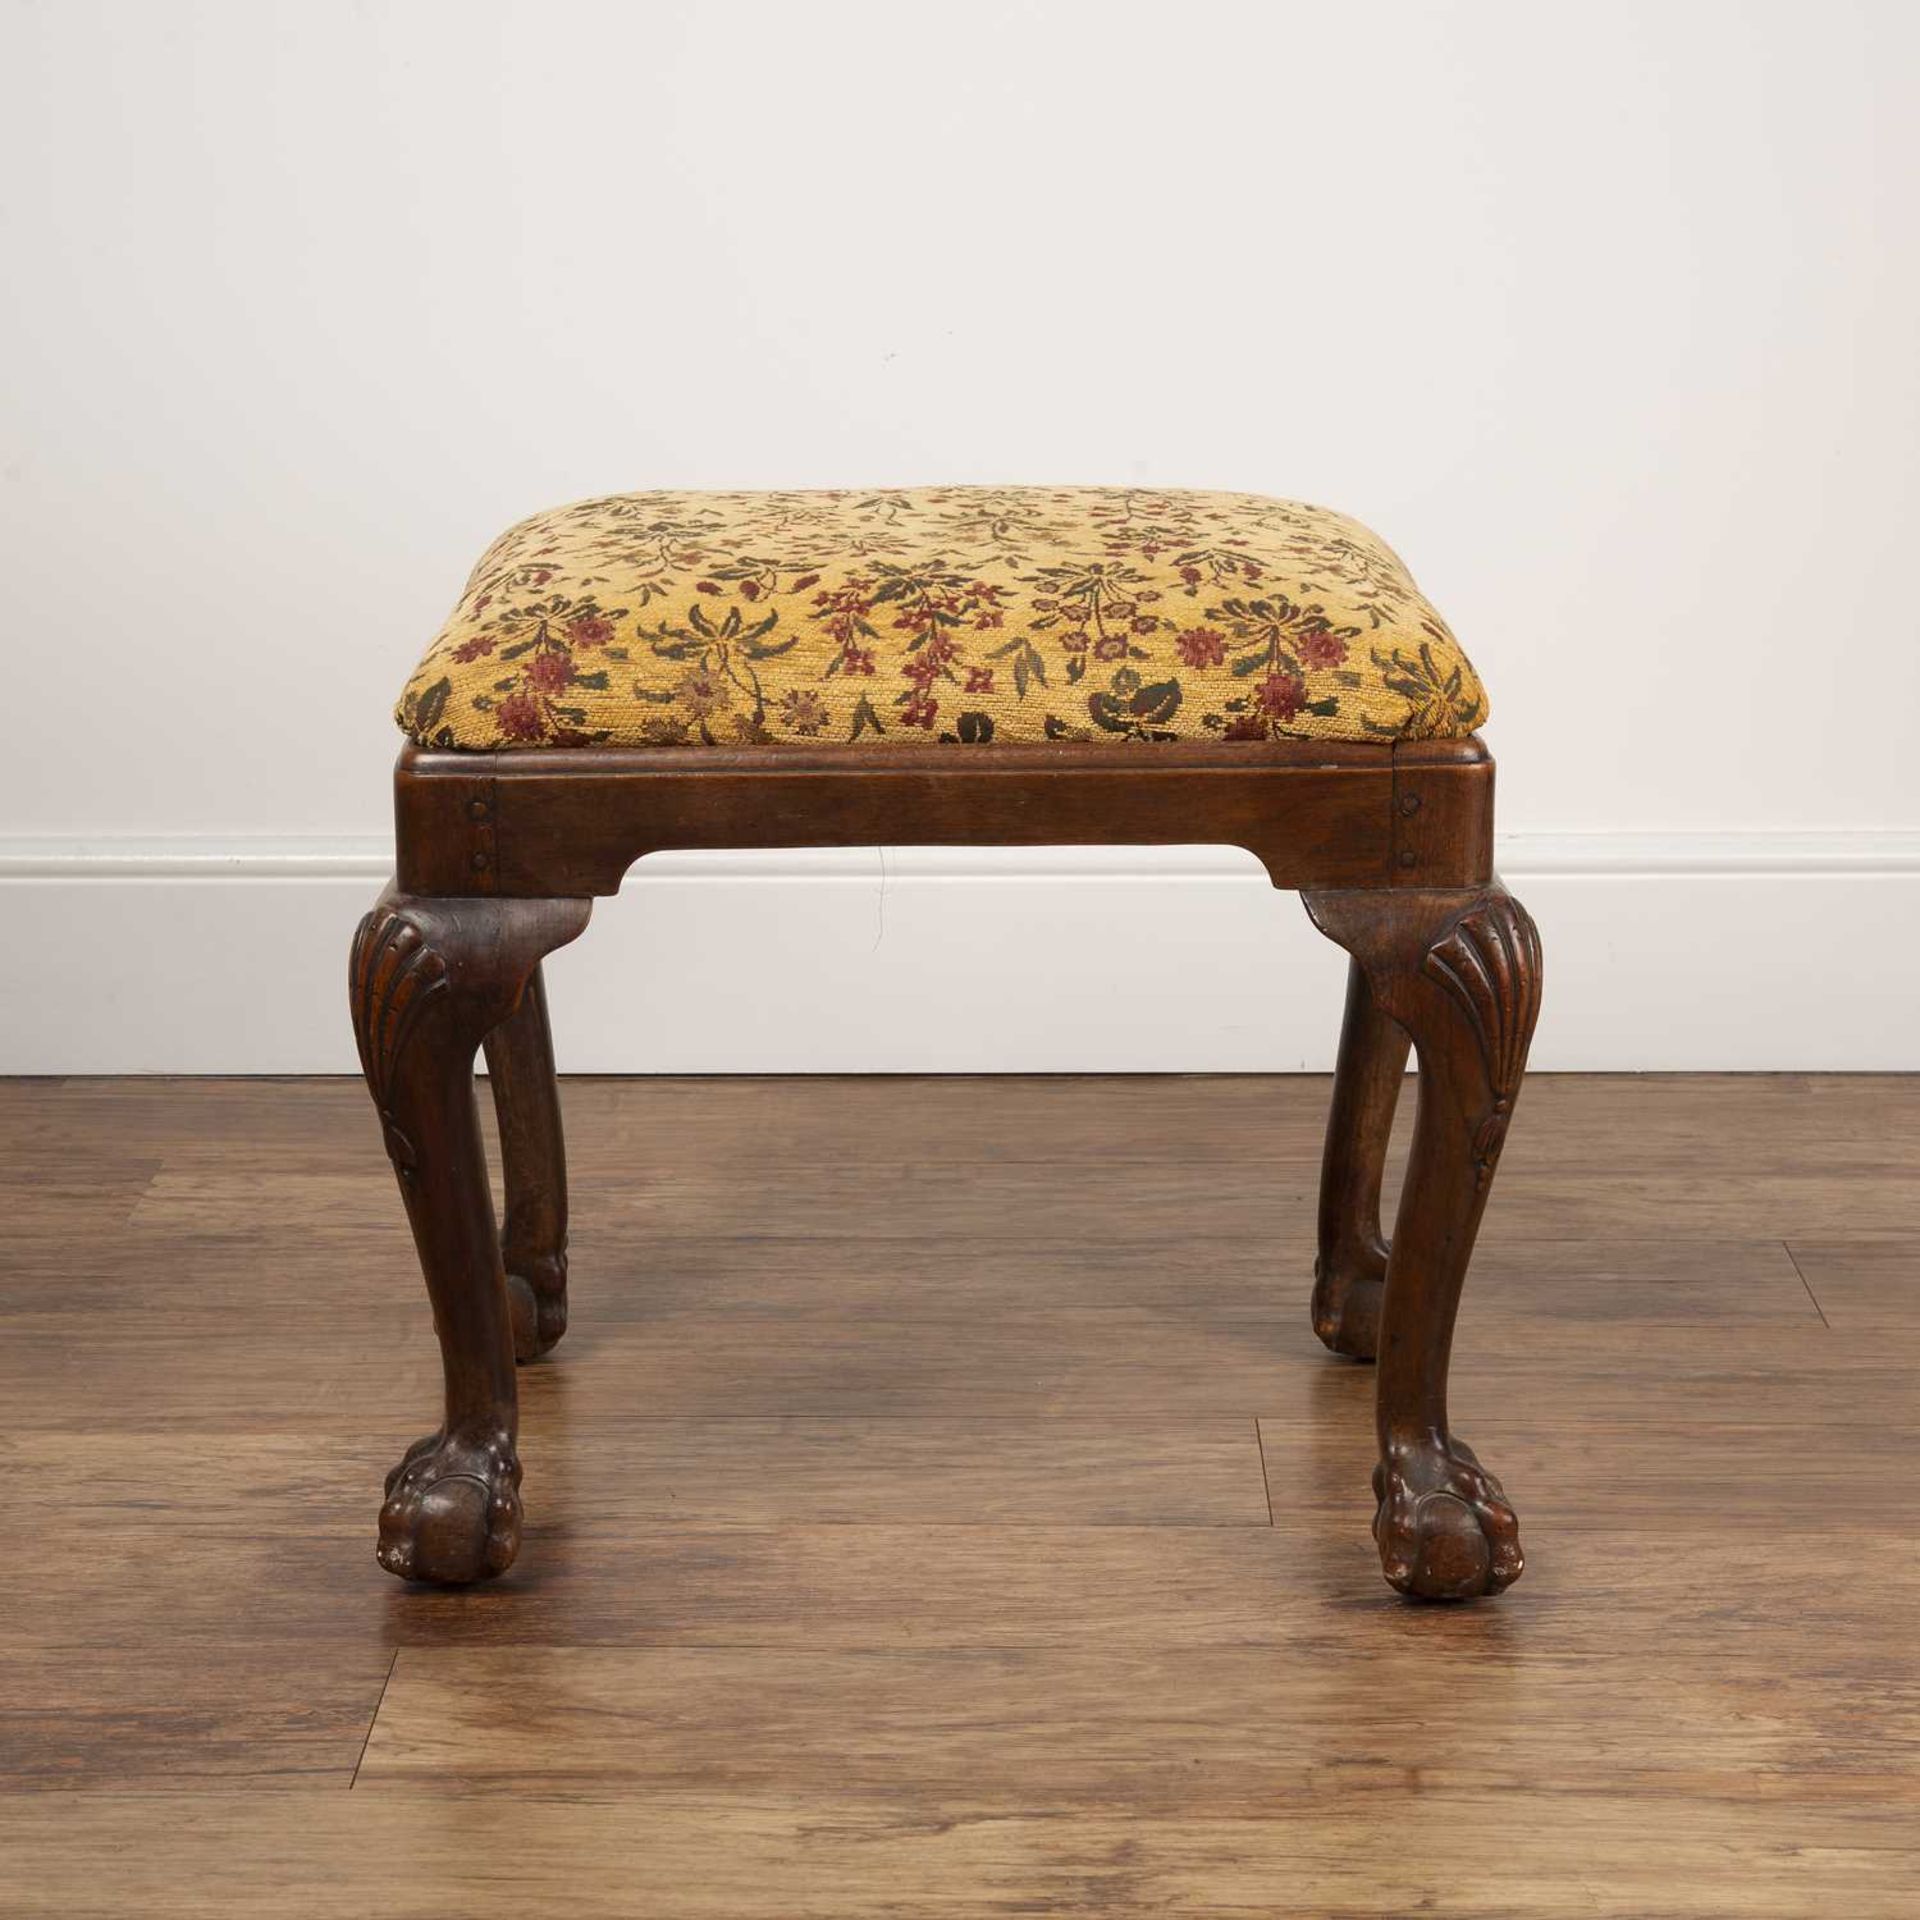 Mahogany stool 19th Century, in the Georgian style, on ball and claw feet, with yellow and floral - Bild 2 aus 3